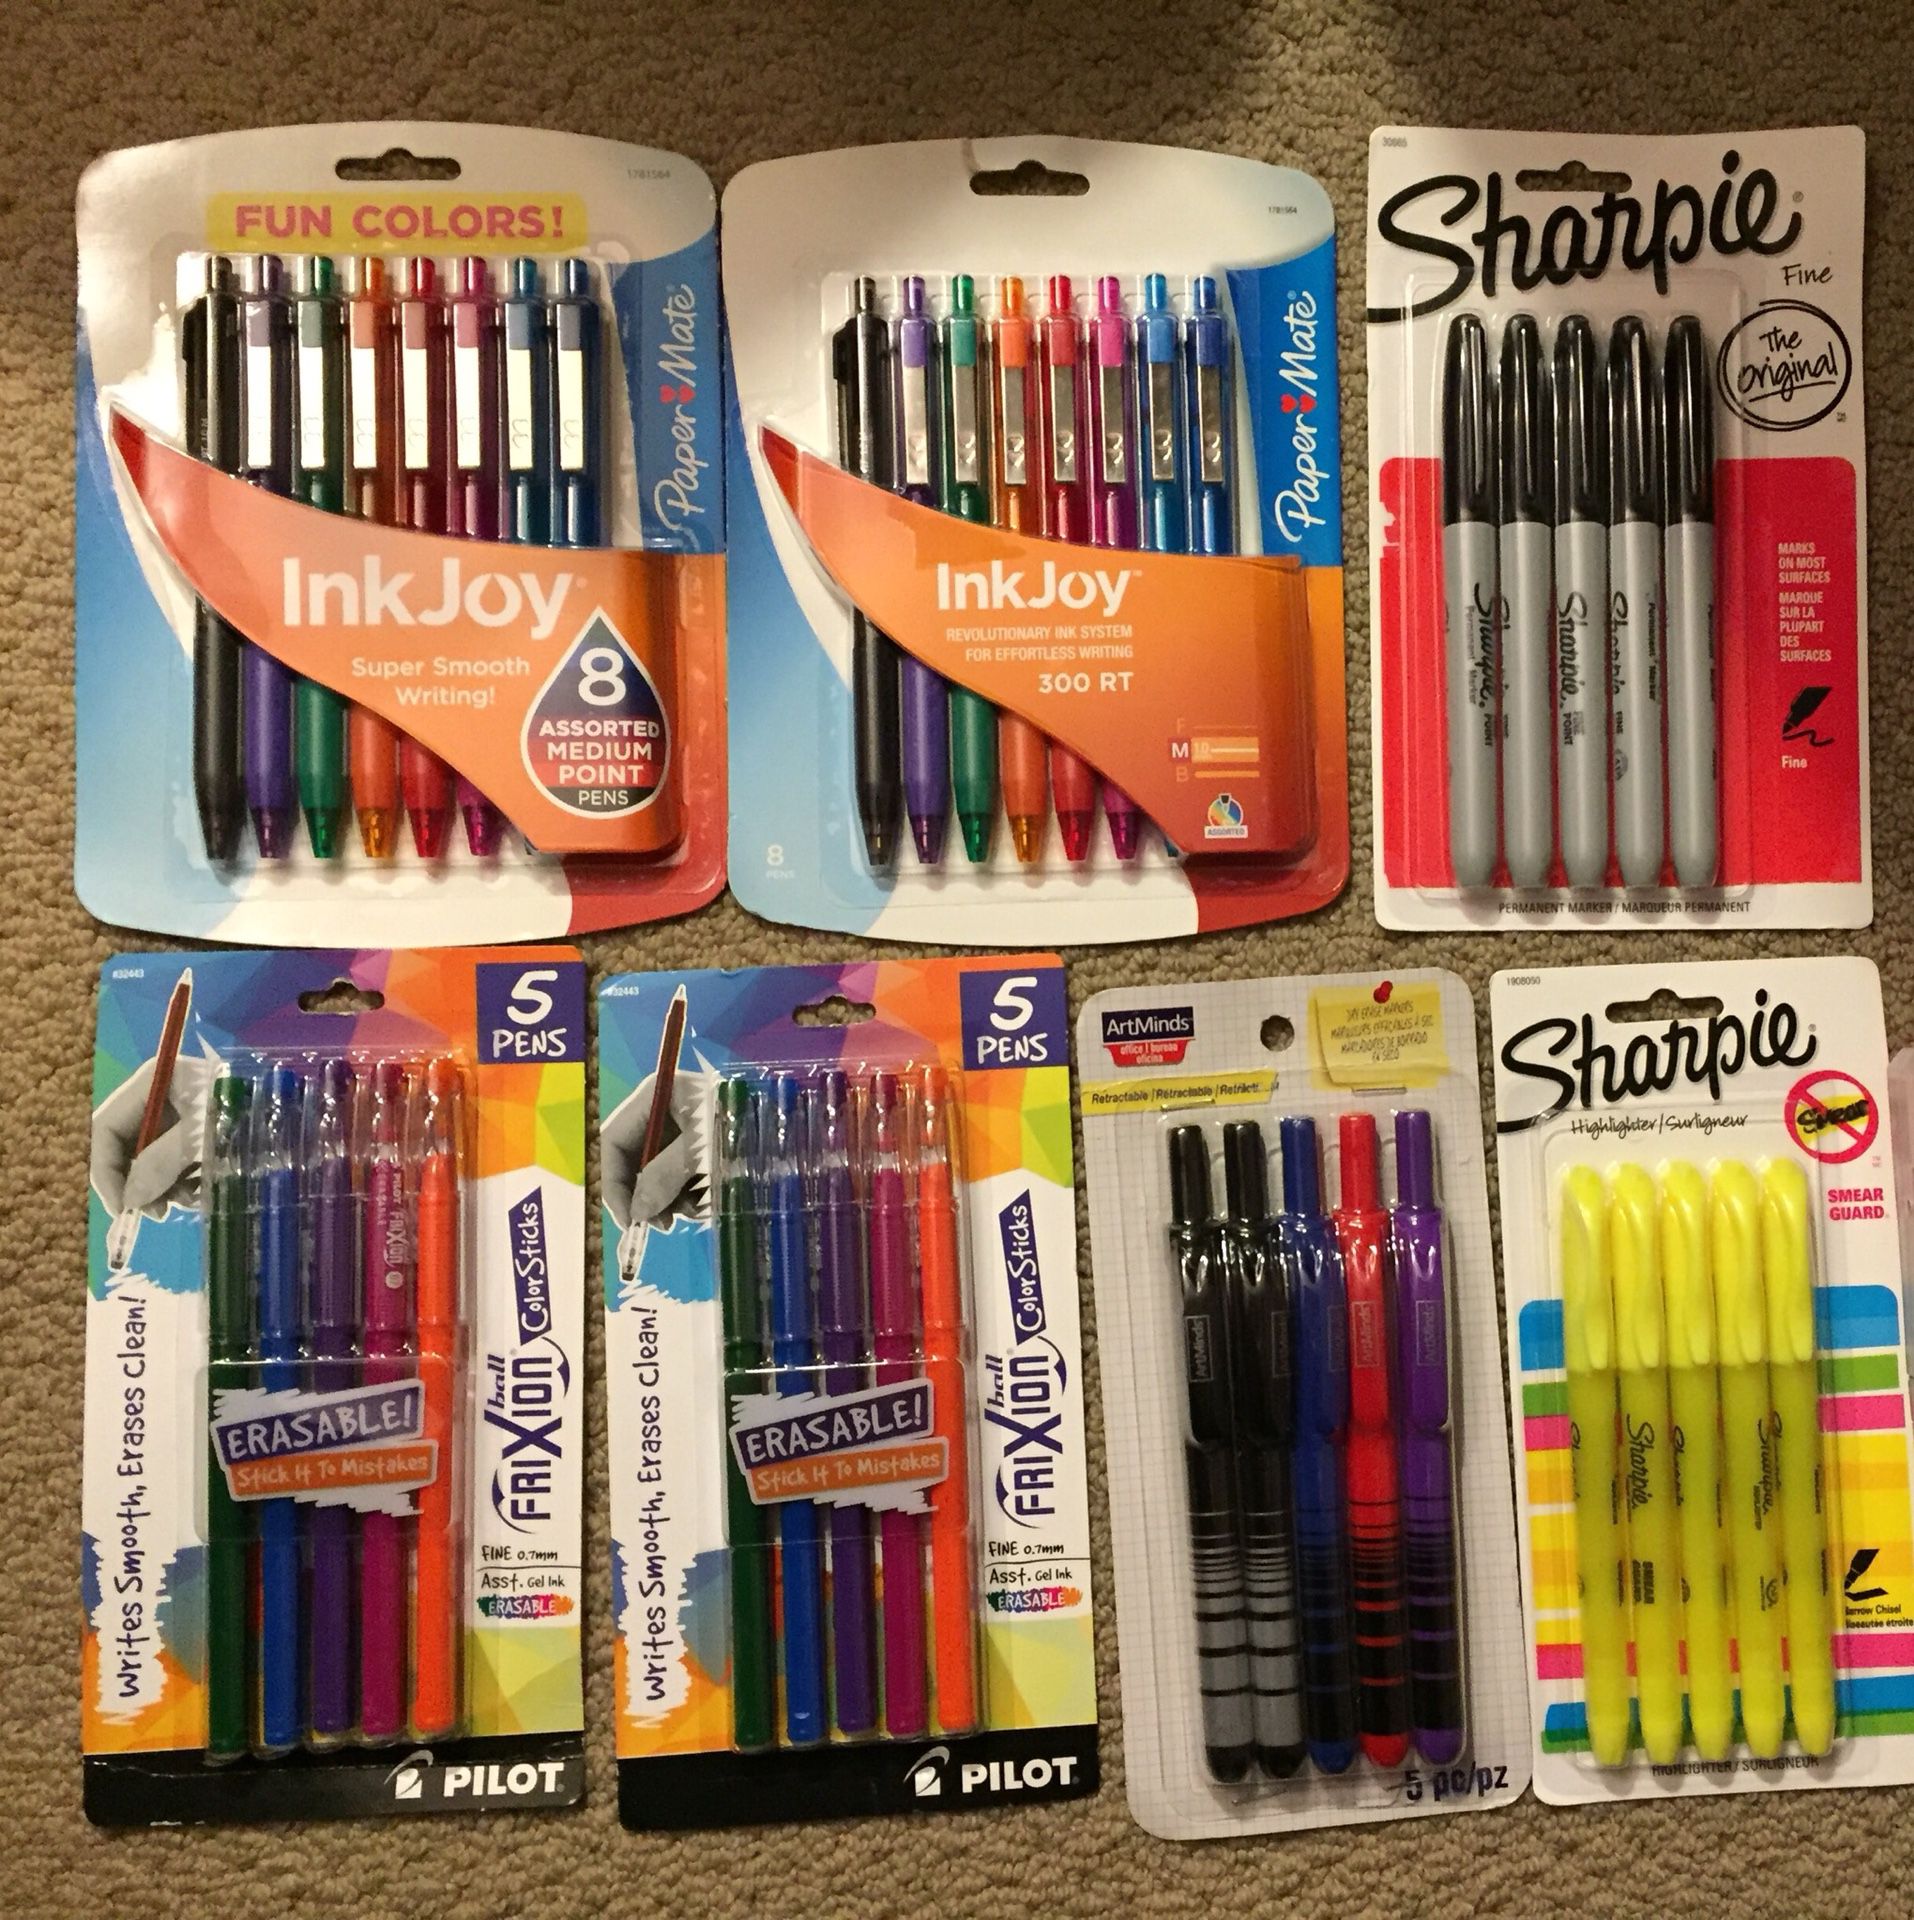 BACK TO SCHOOL BUNDLE PENS HIGHLIGHTERS PENCILS WASHABLE MARKERS SHARPIES PAPER CLIPS WHITEOUT GLUE. ALL BRAND NEW PLZ SEE PICTURES. 26 ITEMS FOR $35